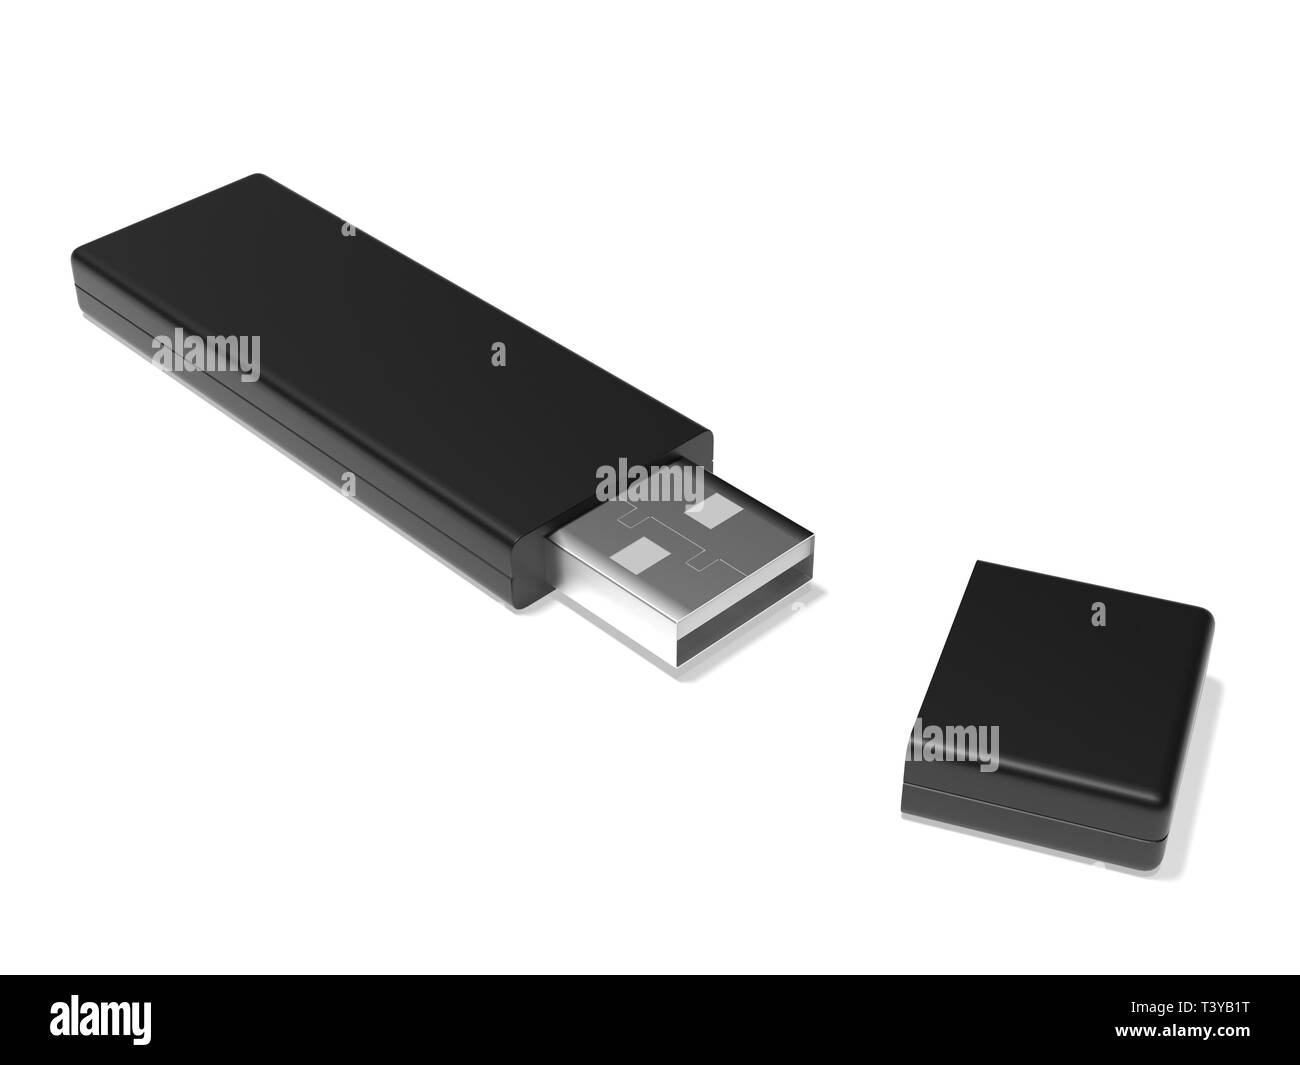 USB flash drive. 3d rendering illustration isolated on white background Stock Photo